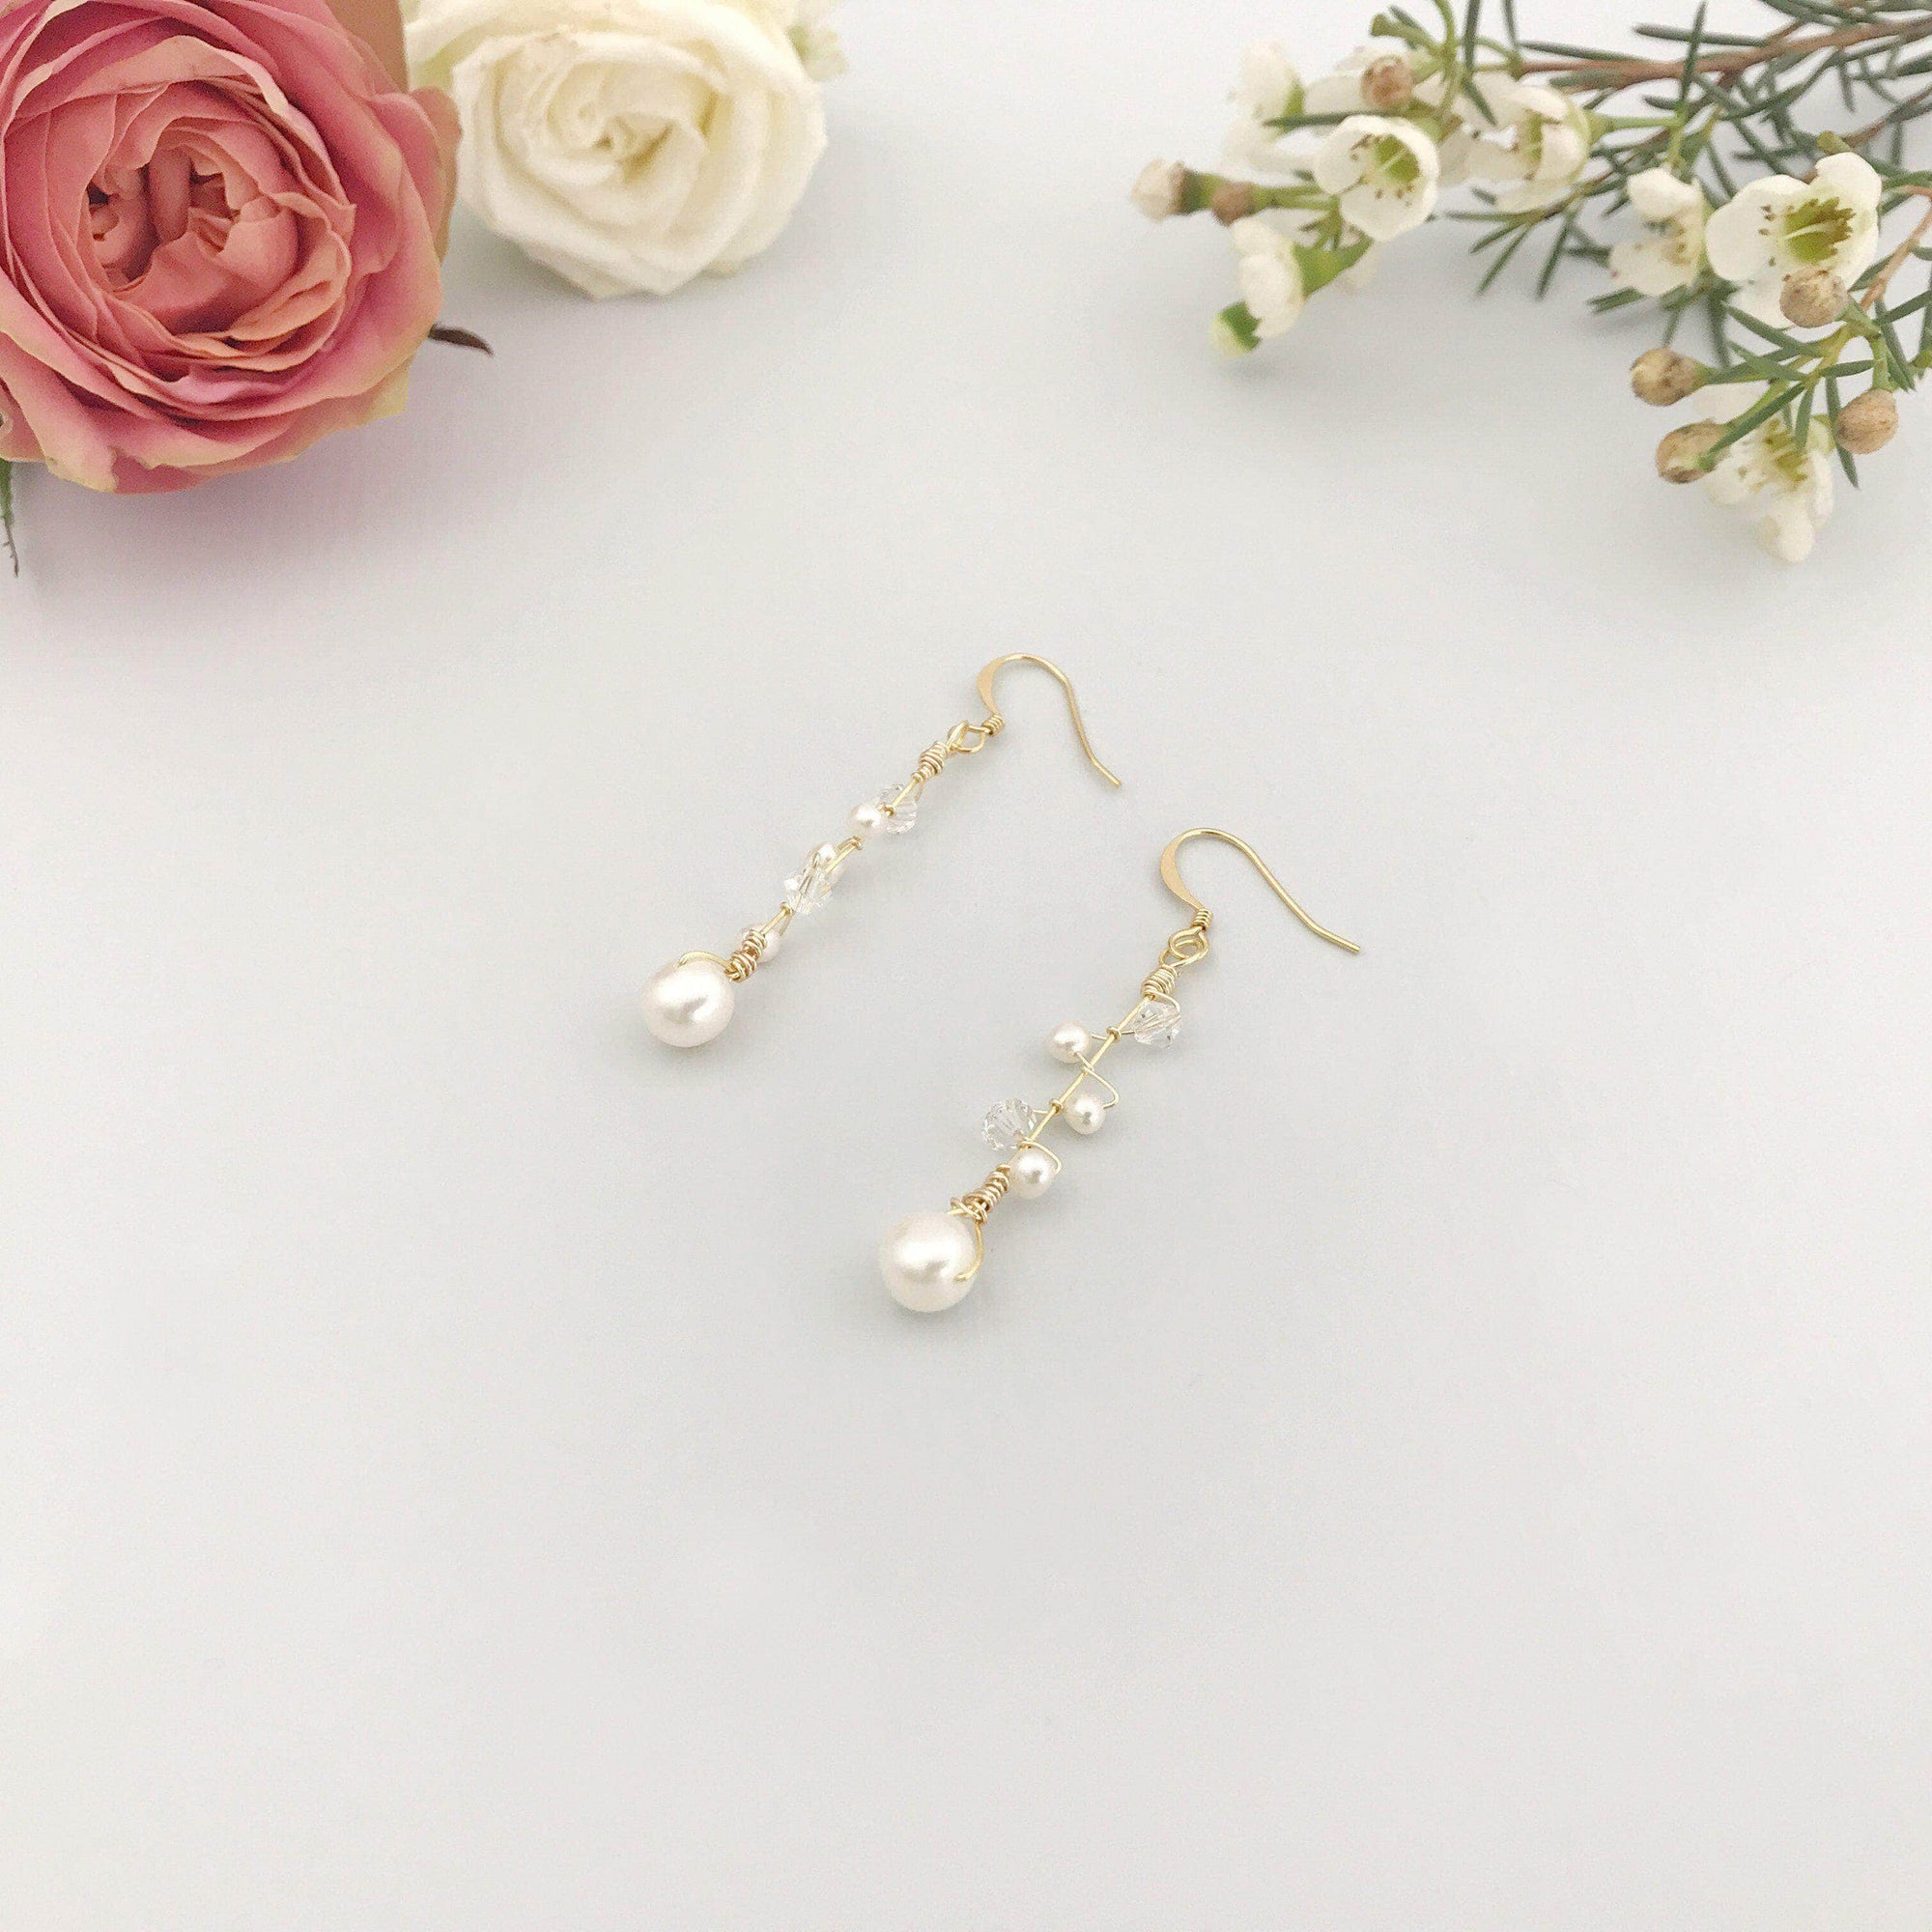 Wedding Earring Gold Gold wedding earrings of crystal and freshwater pearl - 'Addie'